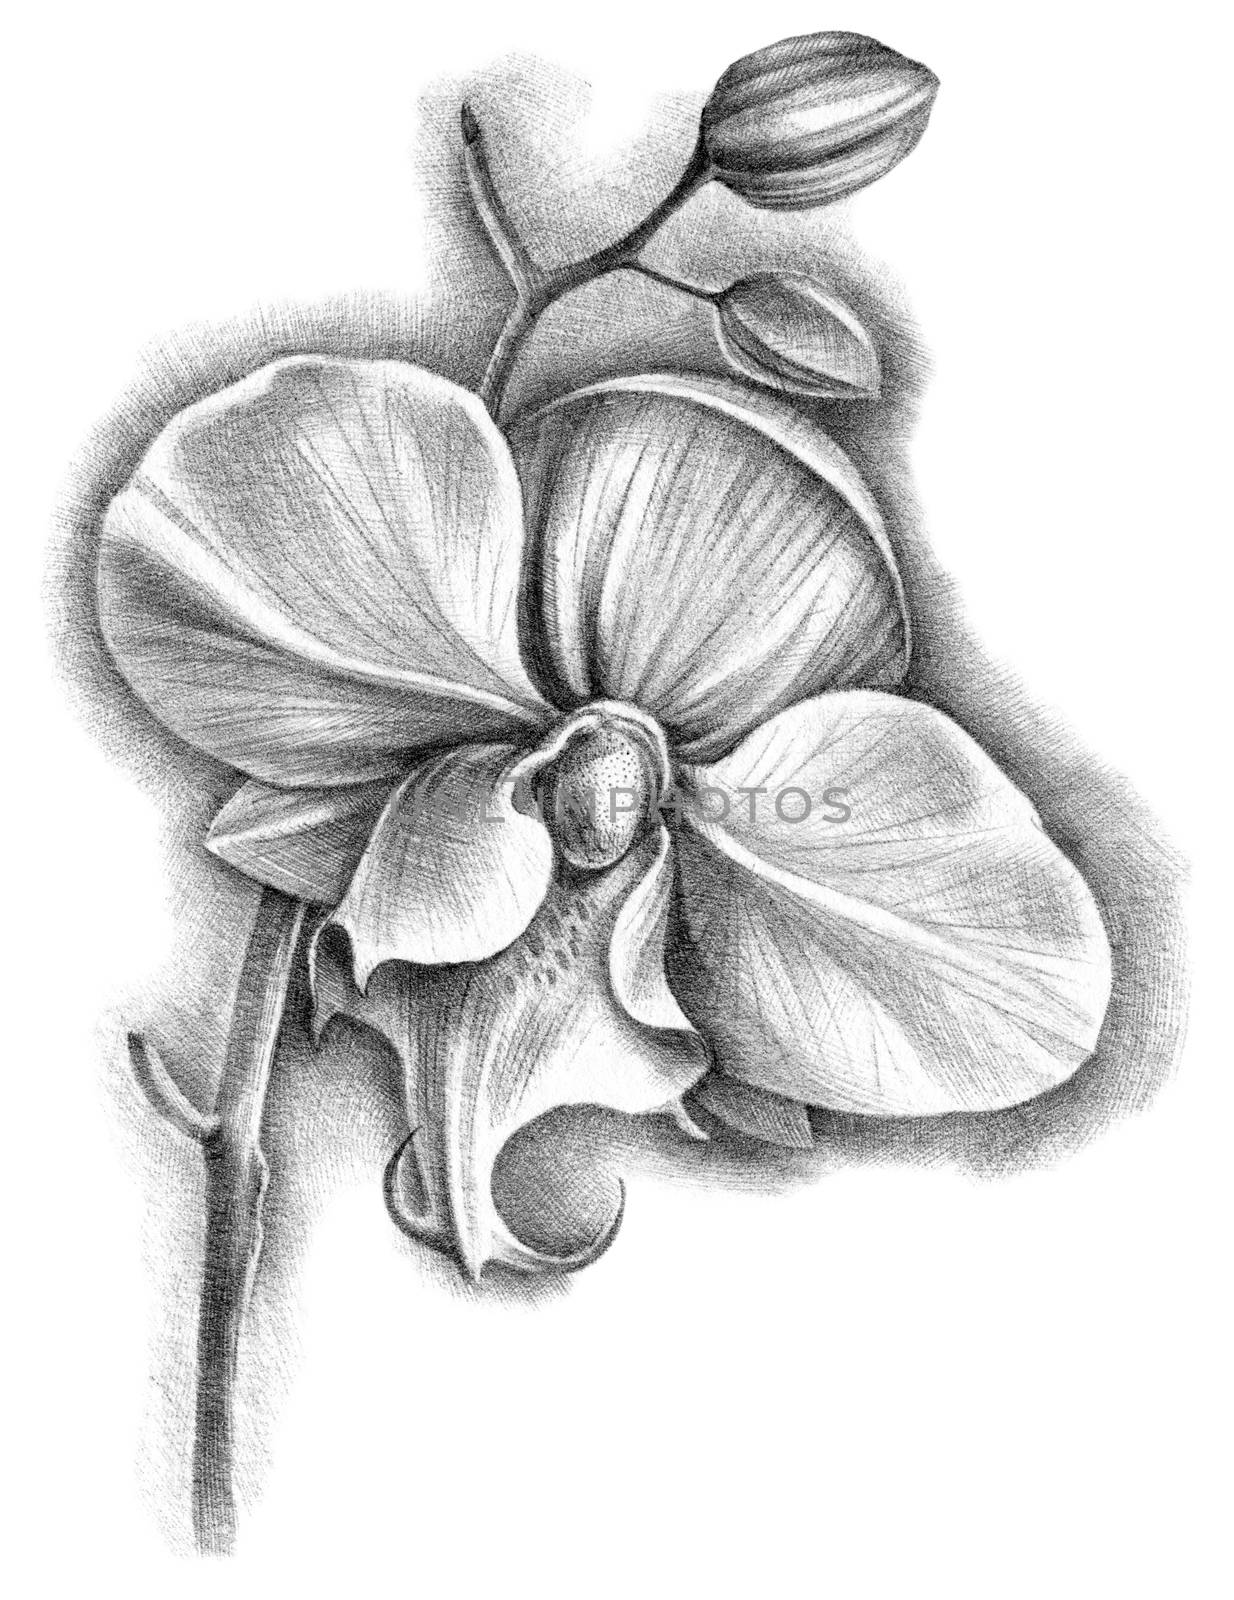 Hand drawn botanical illustration of phalenopsis orchid with flower and buds. Detalized sketch by black ballpen.